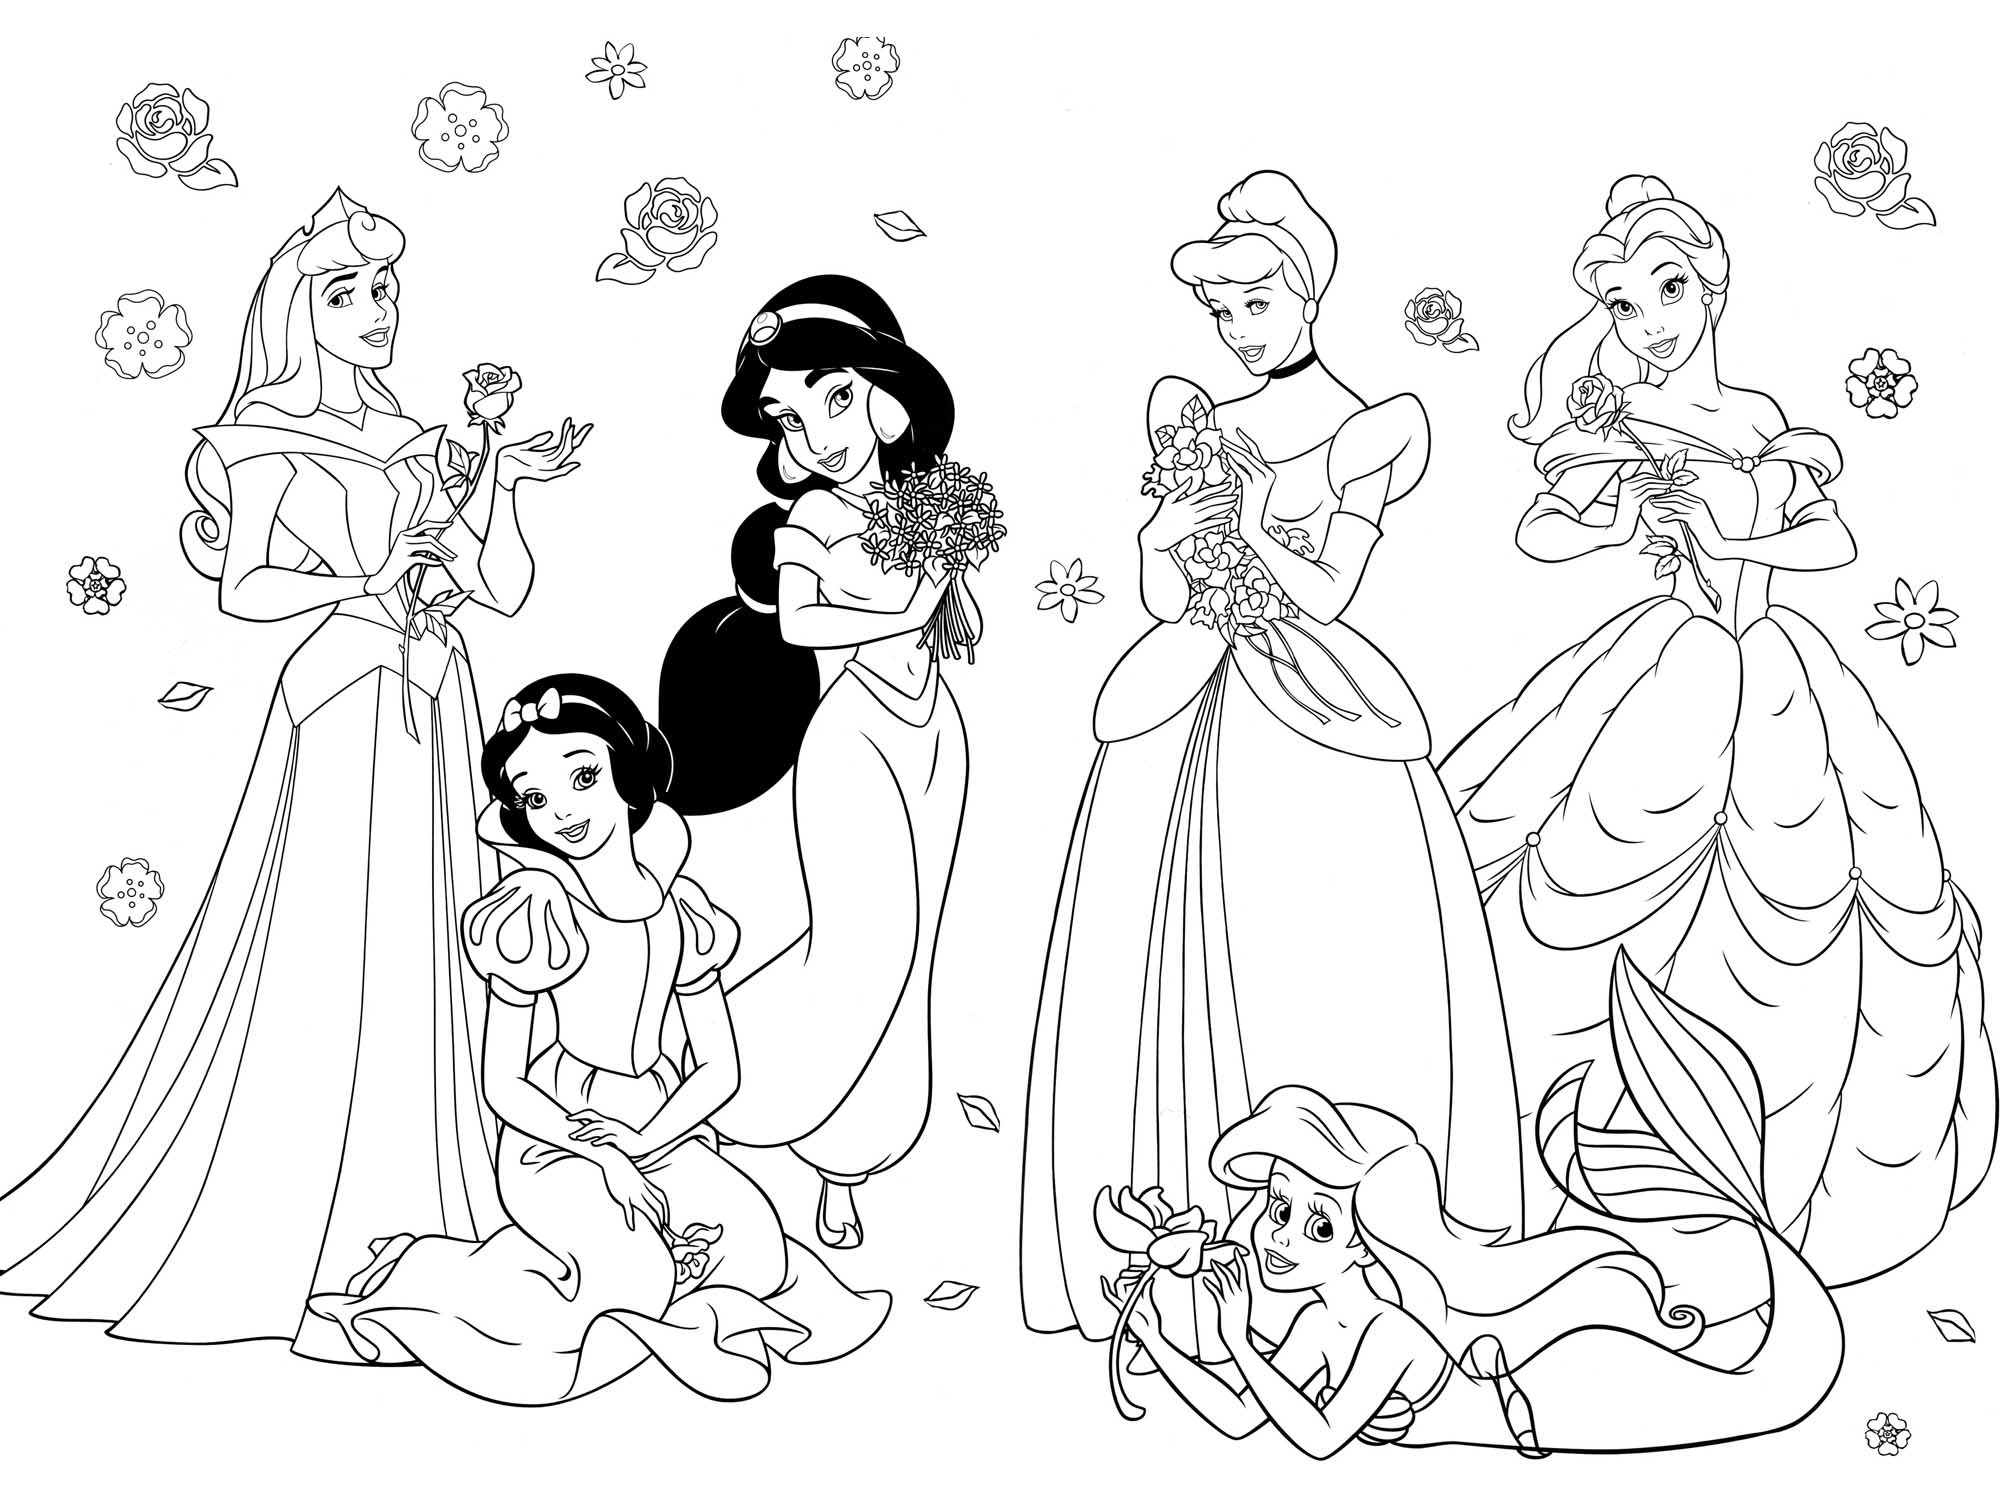 Valentines Disney Coloring Pages - Best Coloring Pages For Kids